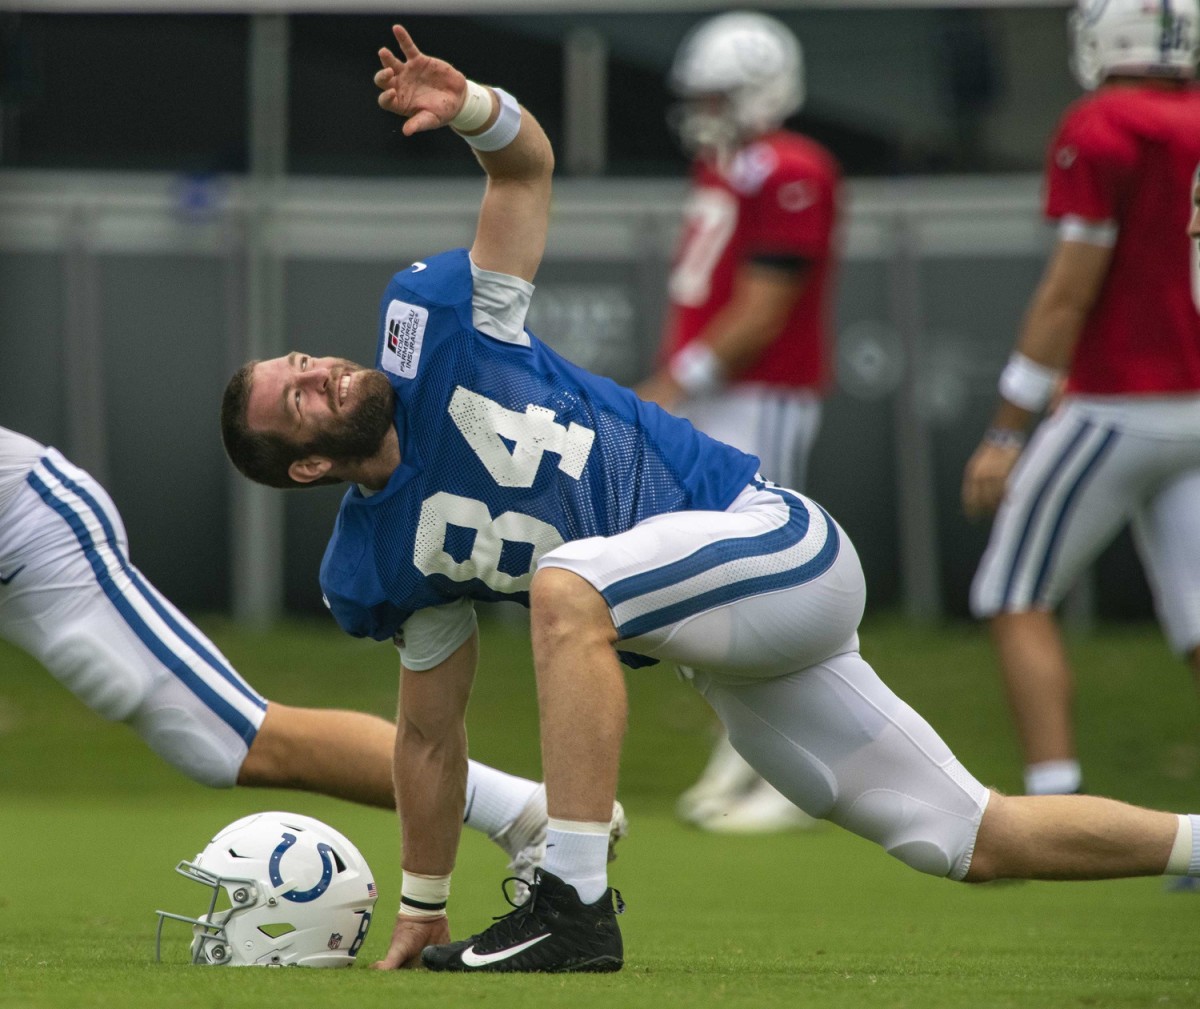 Two-time Pro Bowl tight end Jack Doyle has been ruled out of the Indianapolis Colts' Sunday home game against the Minnesota Vikings with an ankle/knee injuries.